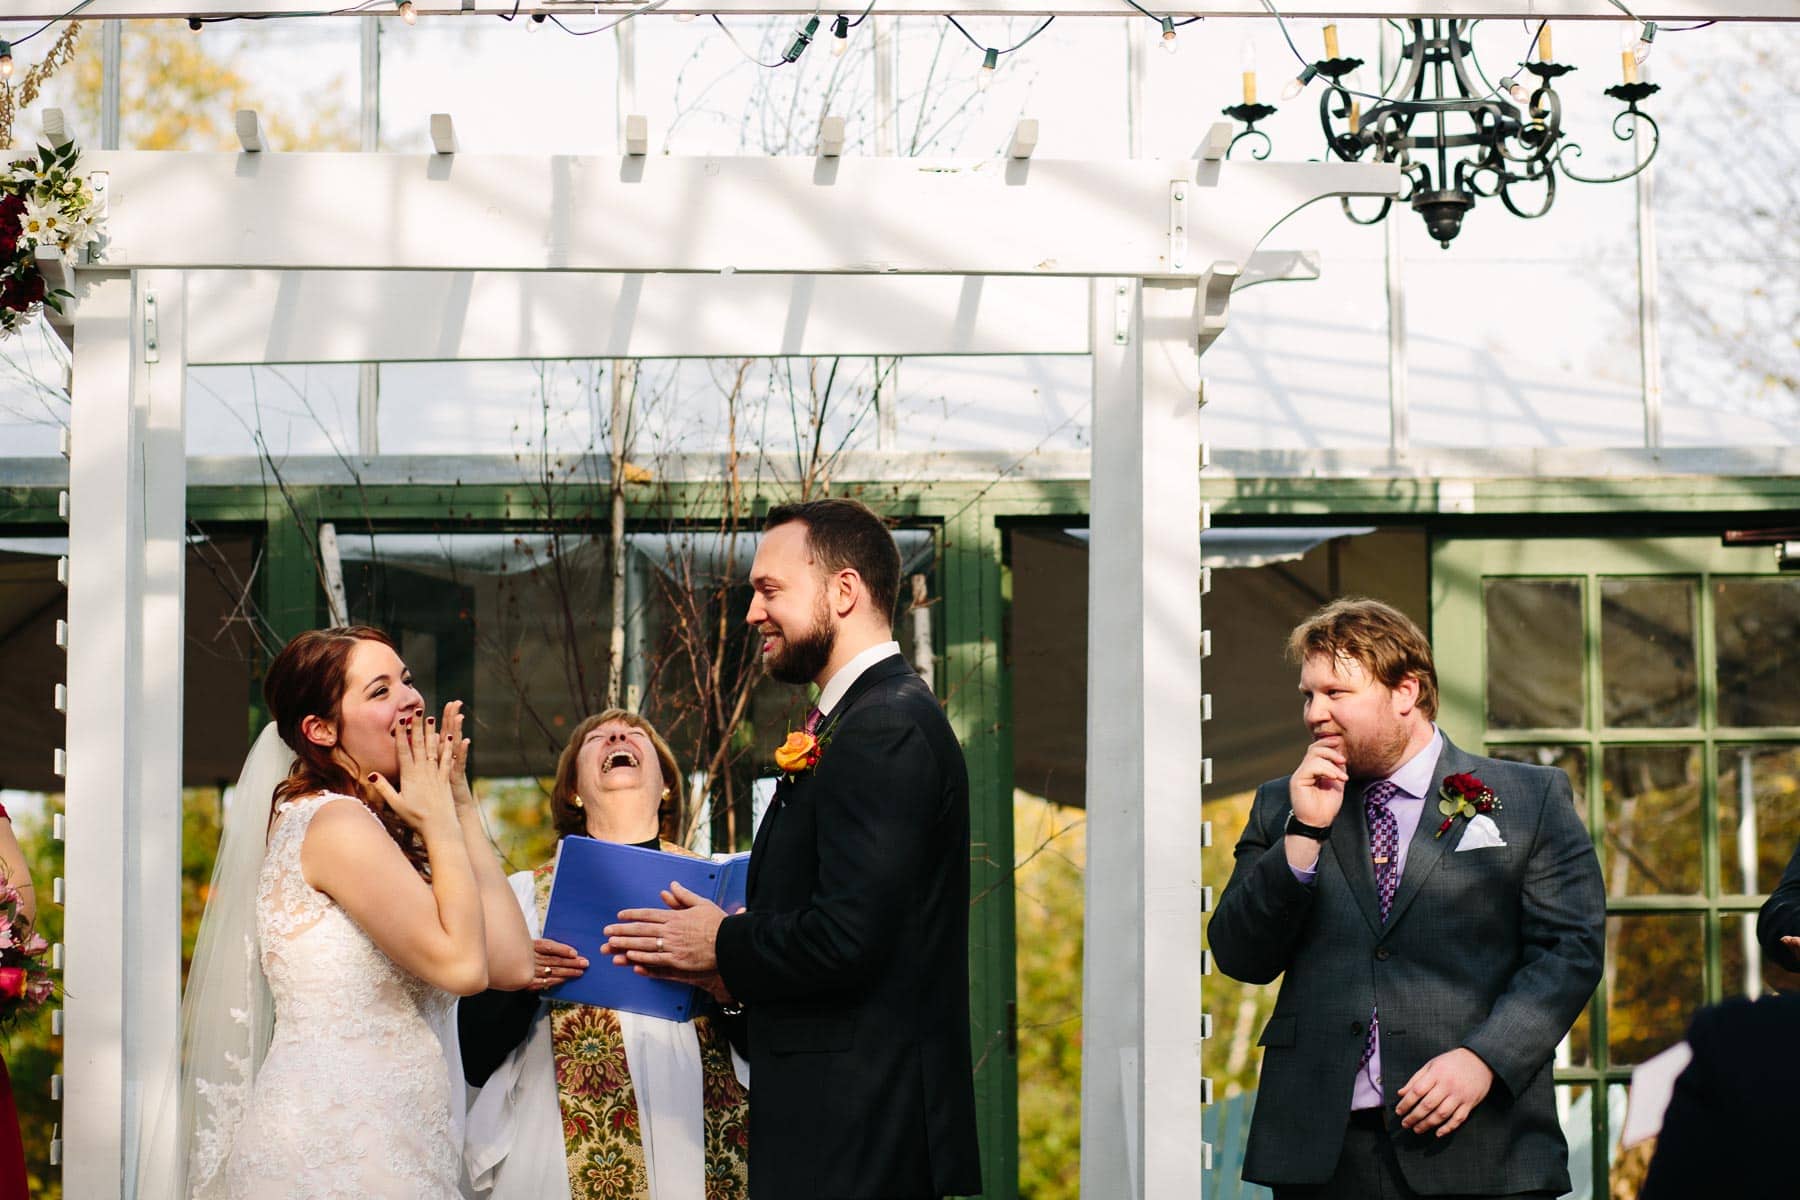 Melissa and Ben's Plymouth New Hampshire Wedding at the Greenhouse | New England wedding photographer Kelly Benvenuto